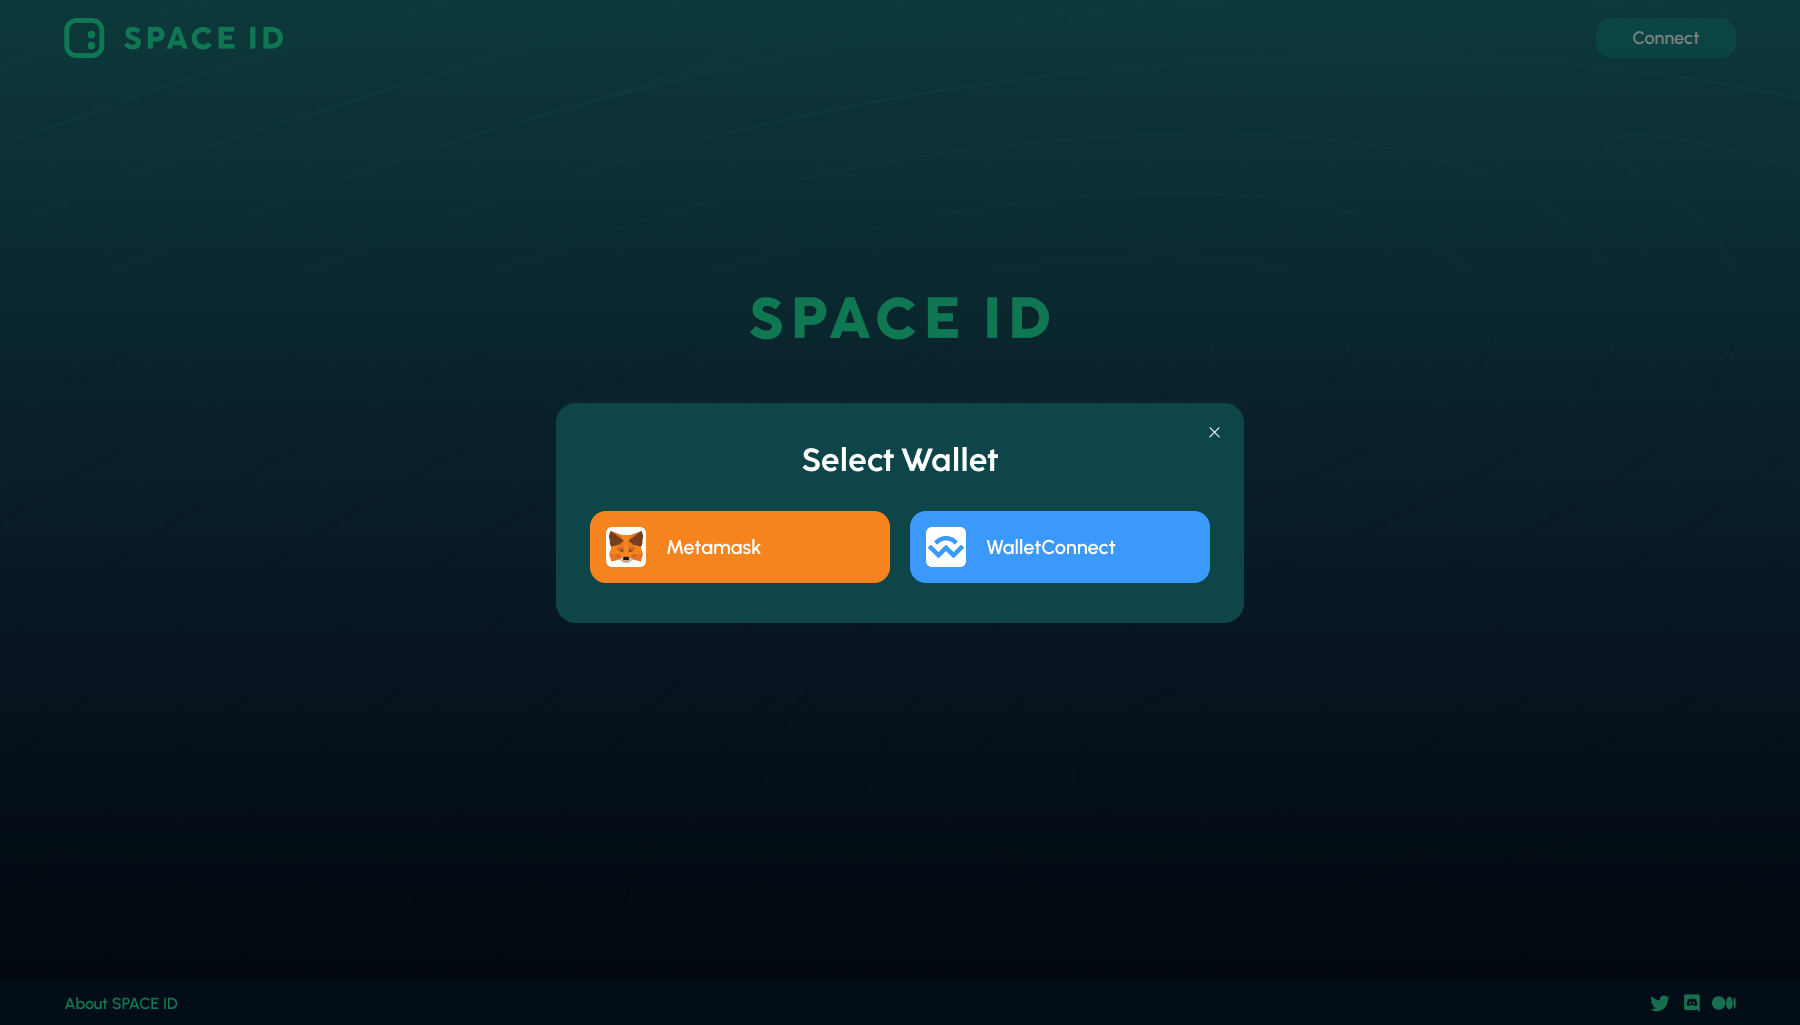 SPACE ID